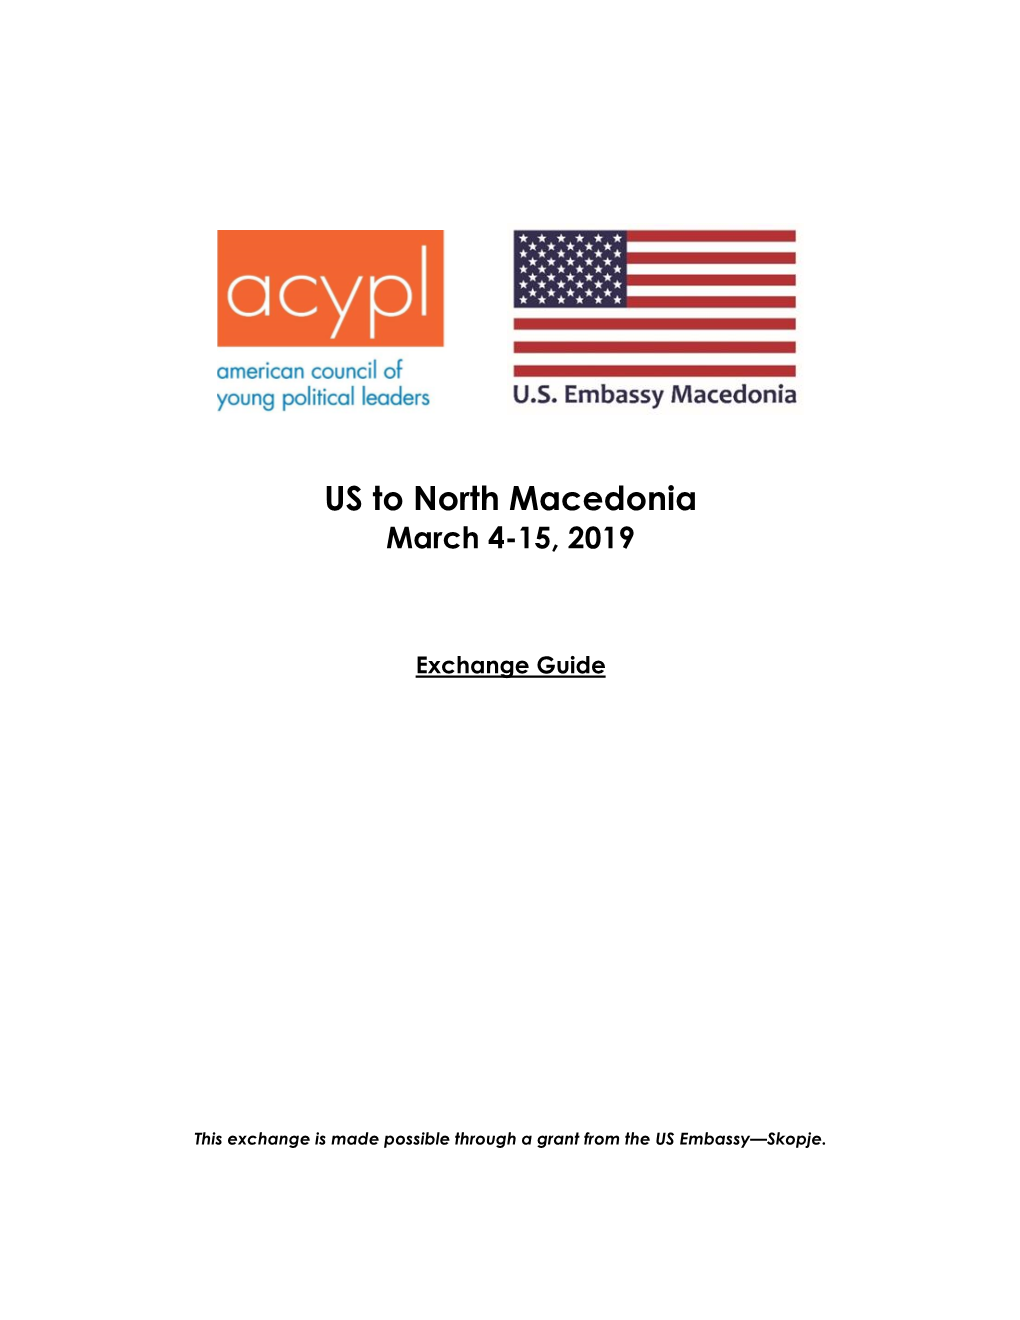 US to North Macedonia March 4-15, 2019